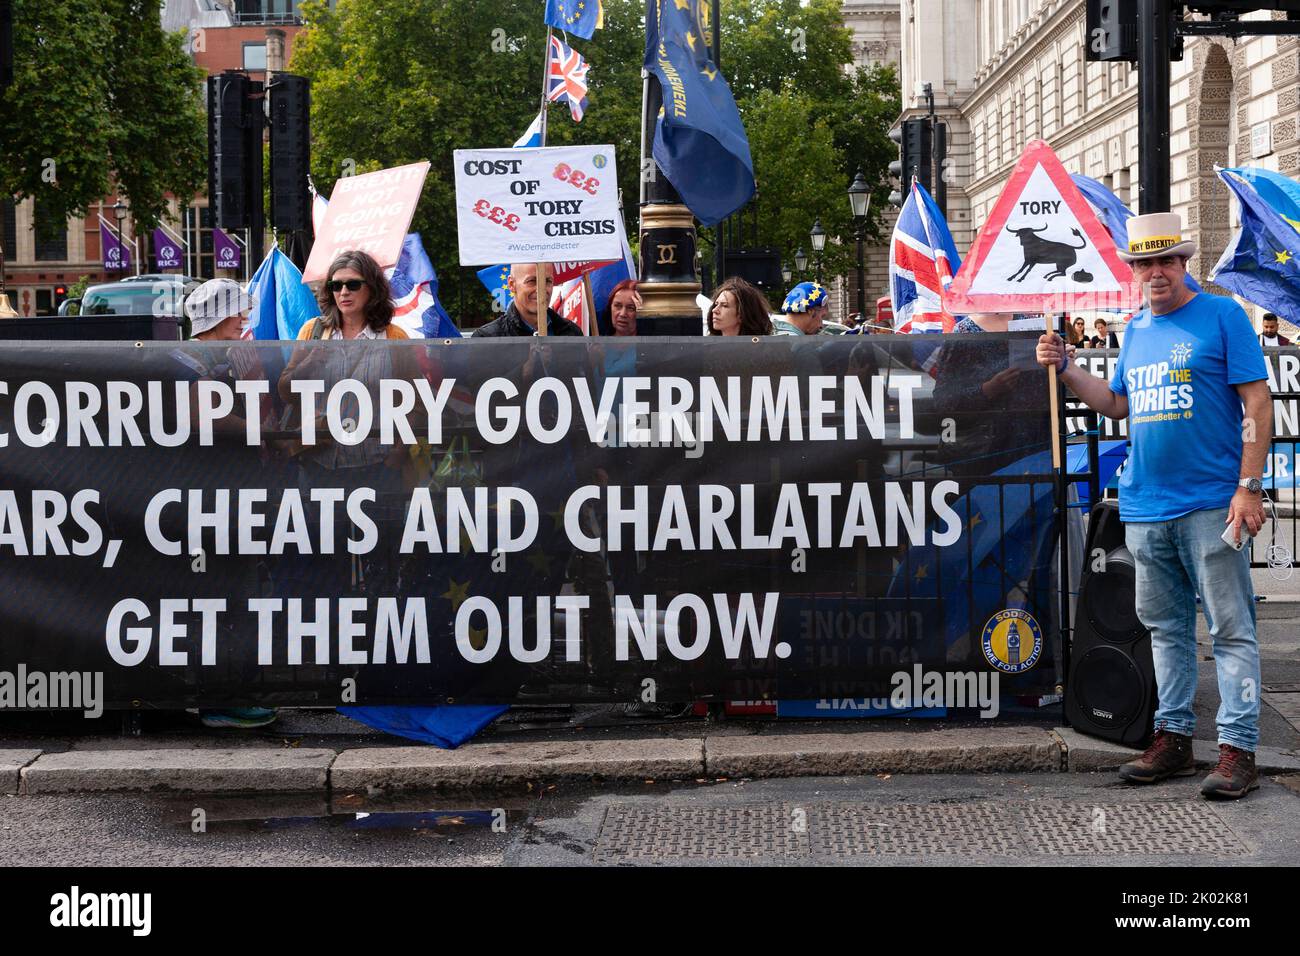 Steve Bray with Anti Tory Government Protest in Westminster, London Following Election of Liz Truss 2022. Stock Photo